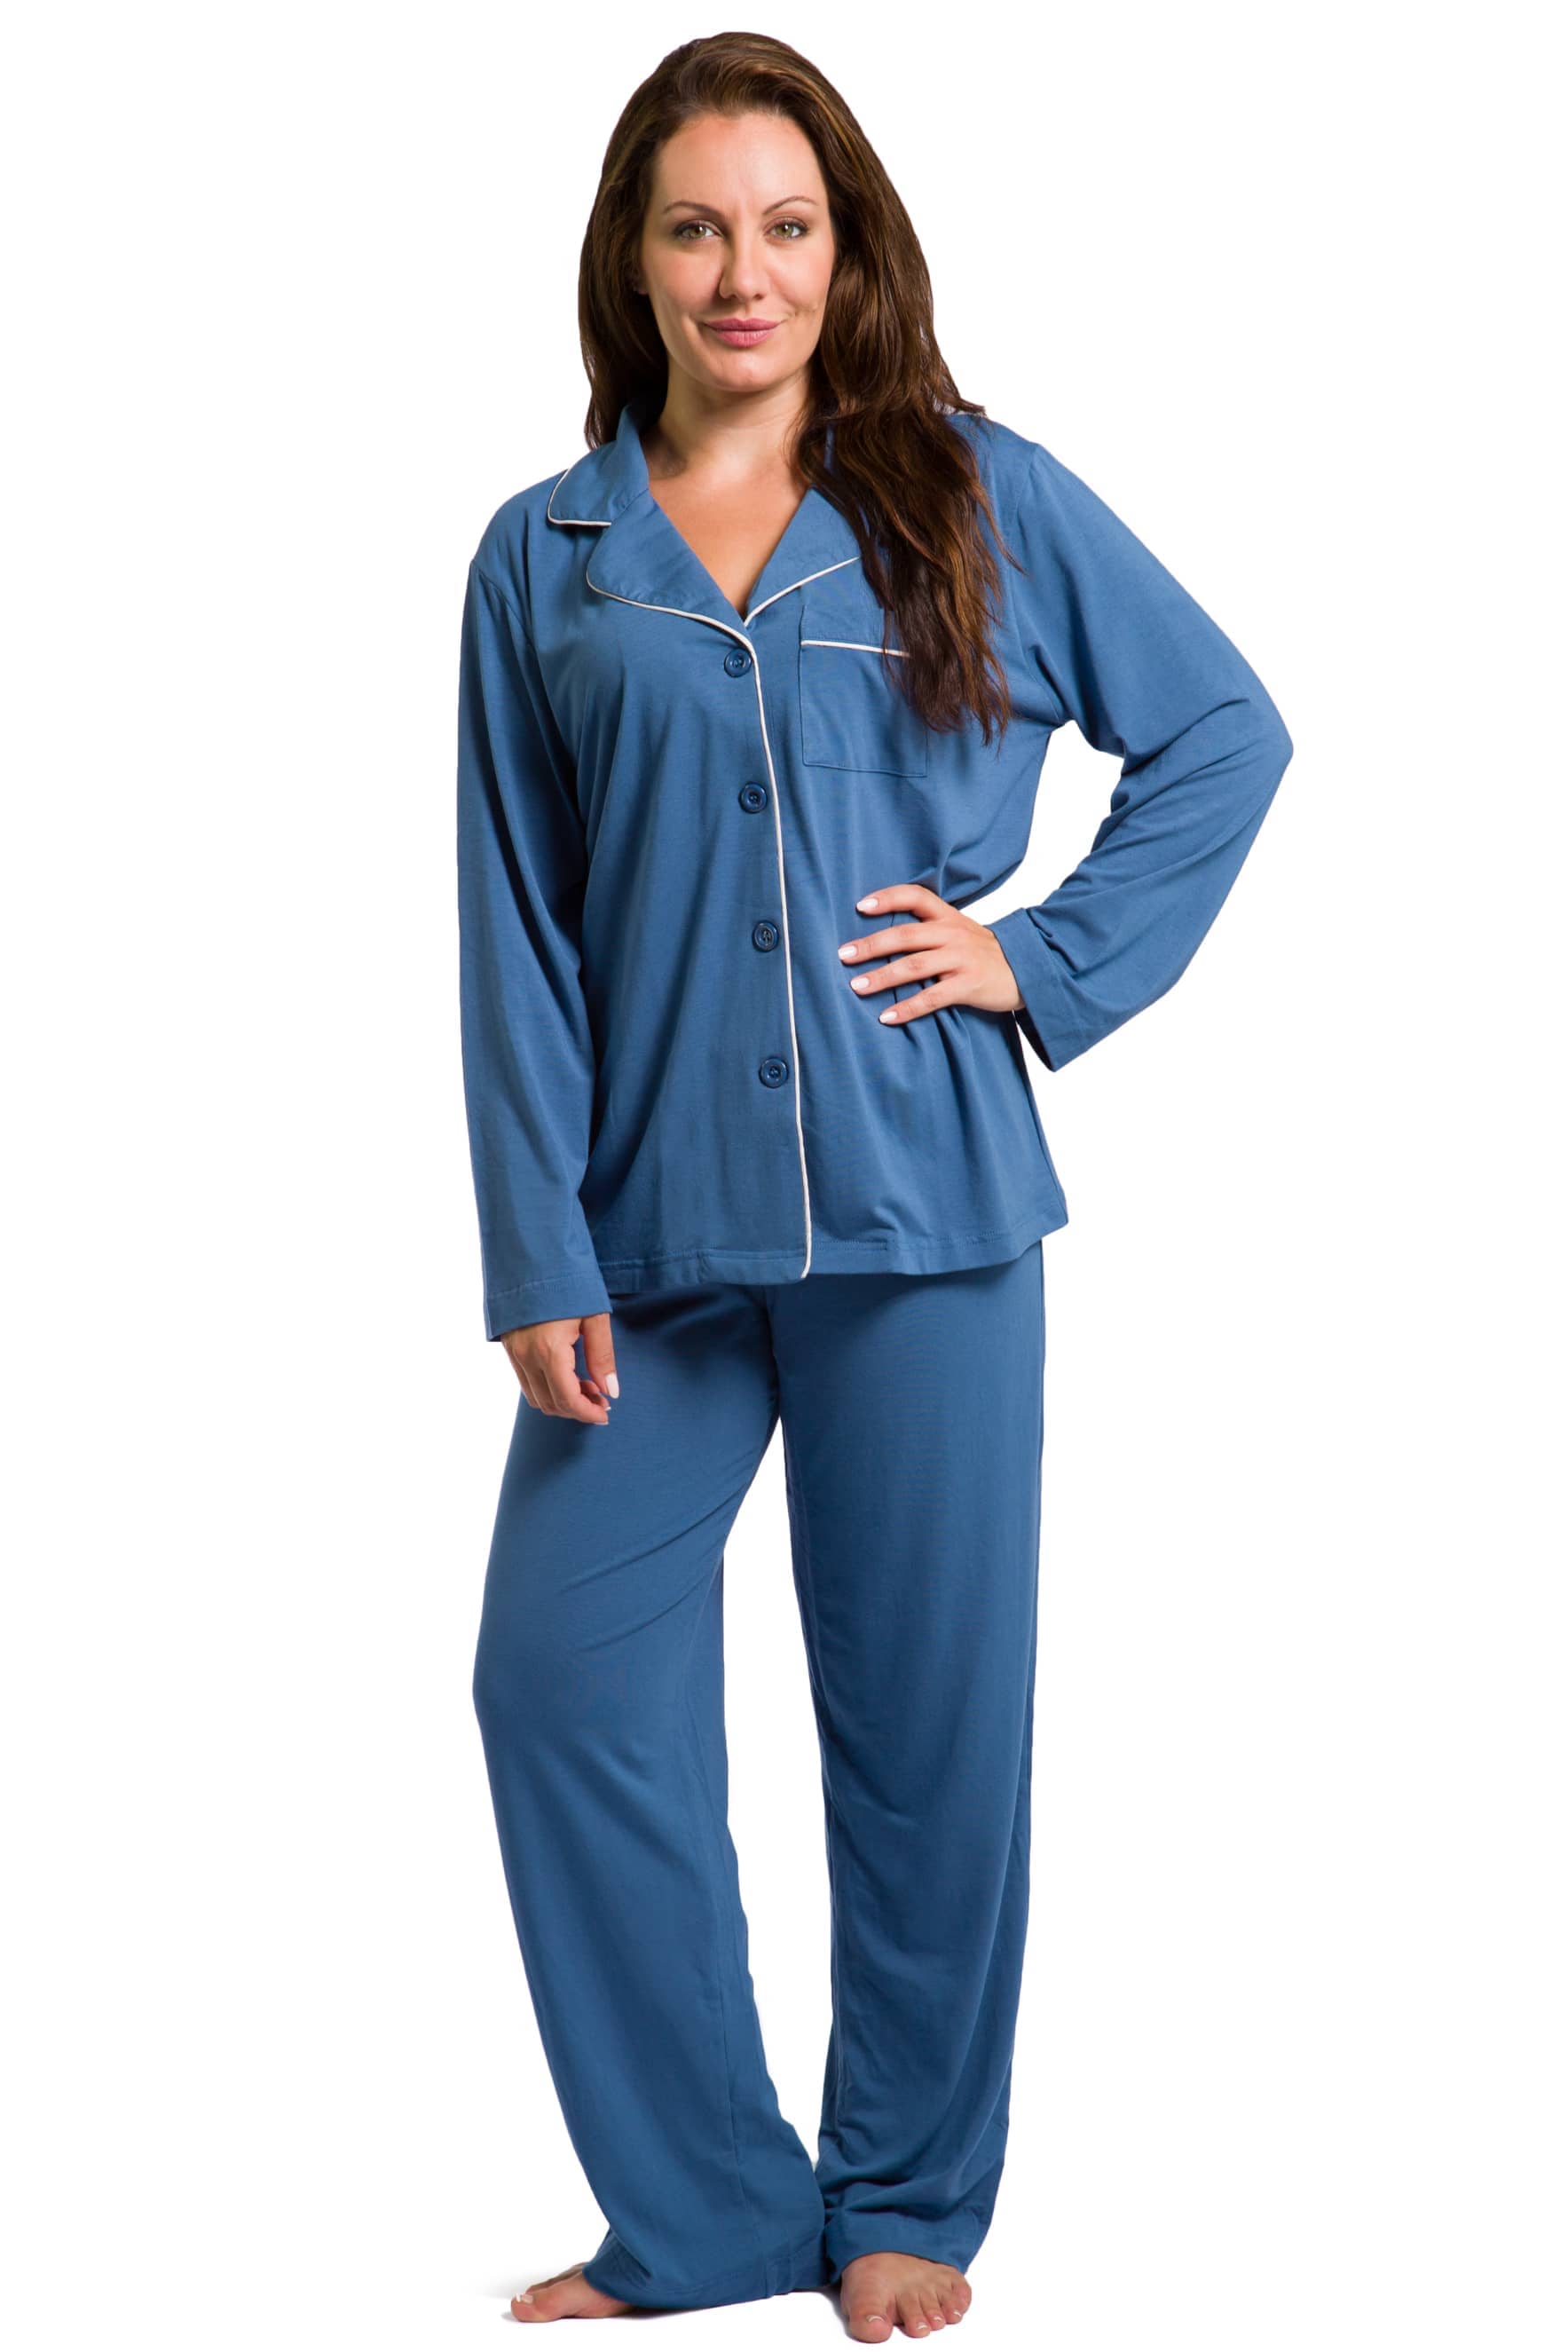  Radiant Queen Womens Cotton Pajama Set Long Sleeve